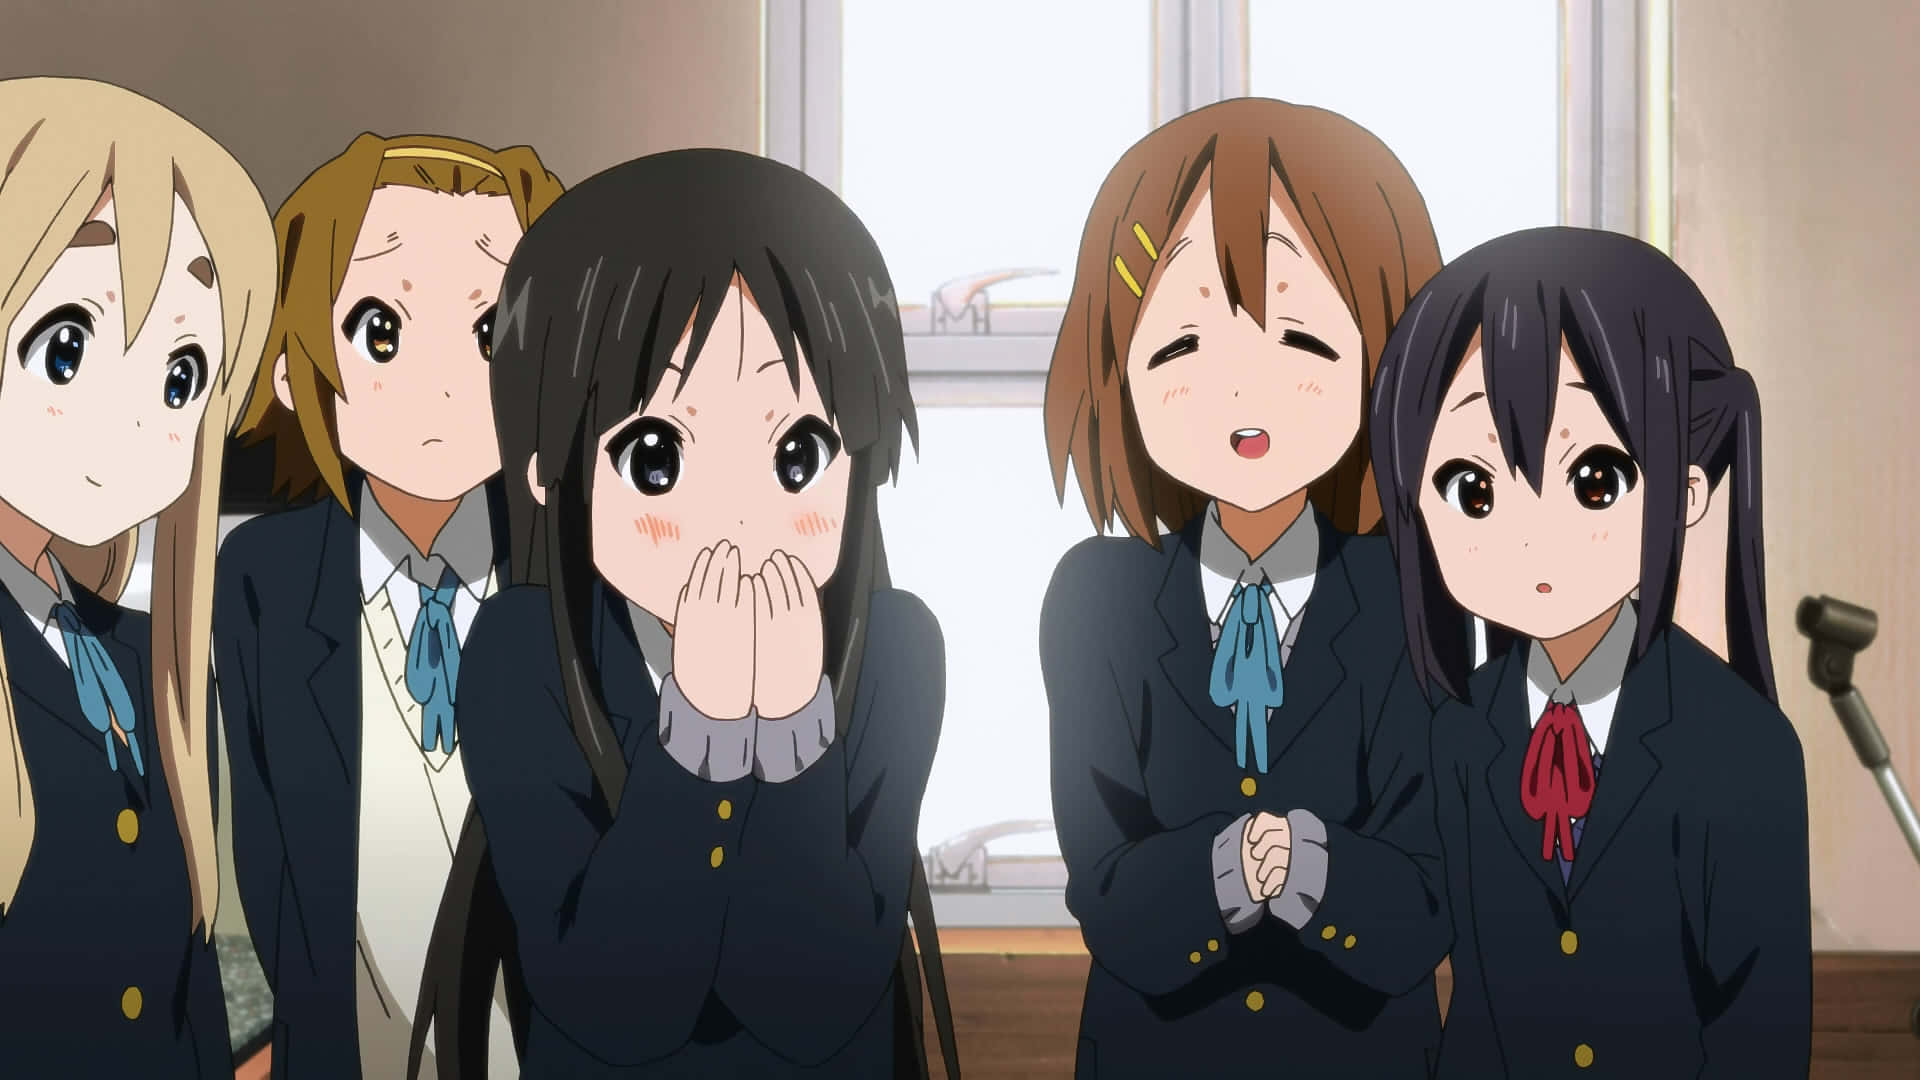 A Group Of Anime Girls In Uniforms Standing In Front Of A Microphone